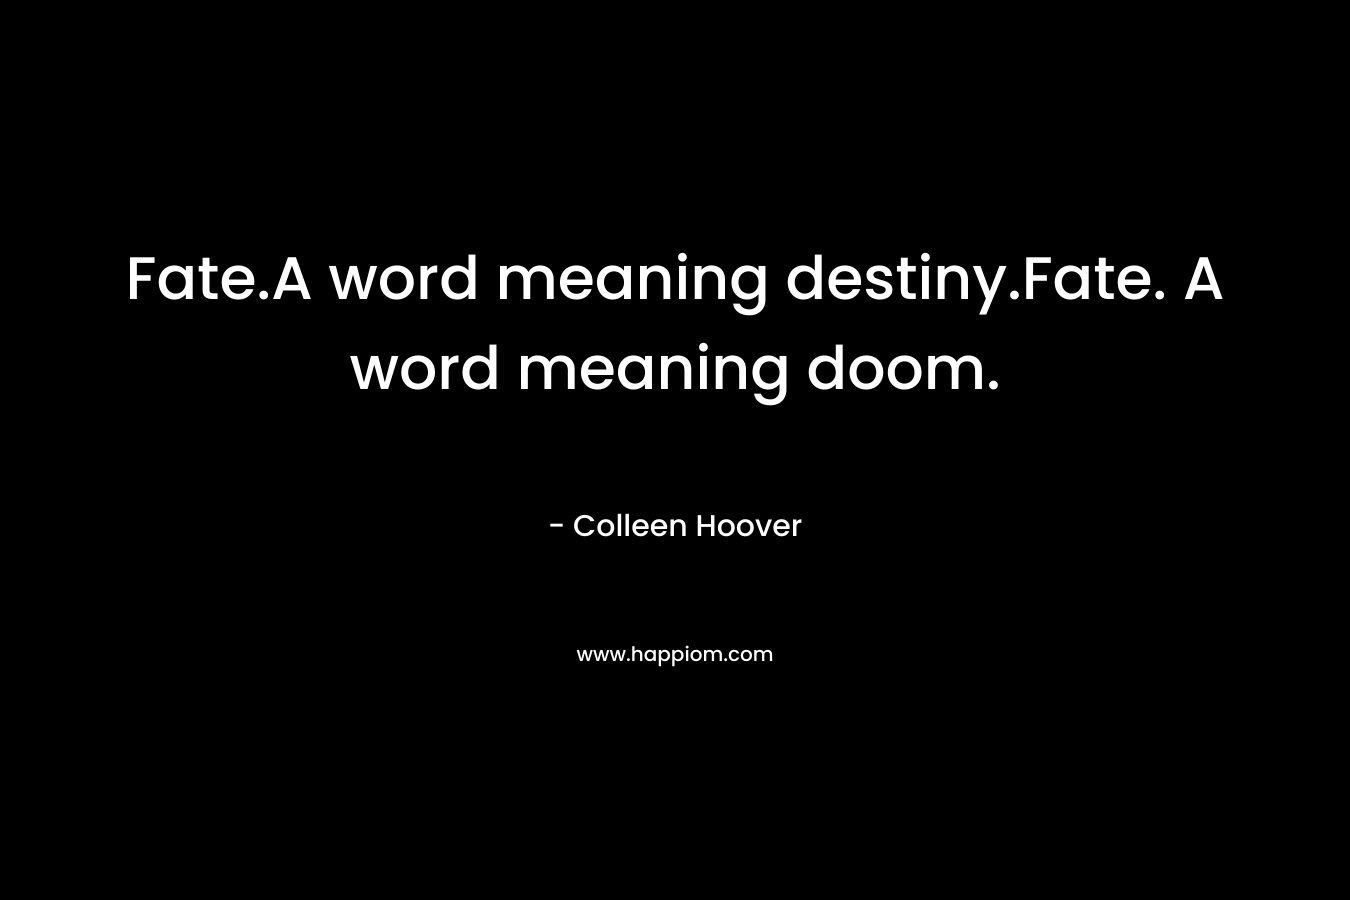 Fate.A word meaning destiny.Fate. A word meaning doom. – Colleen Hoover